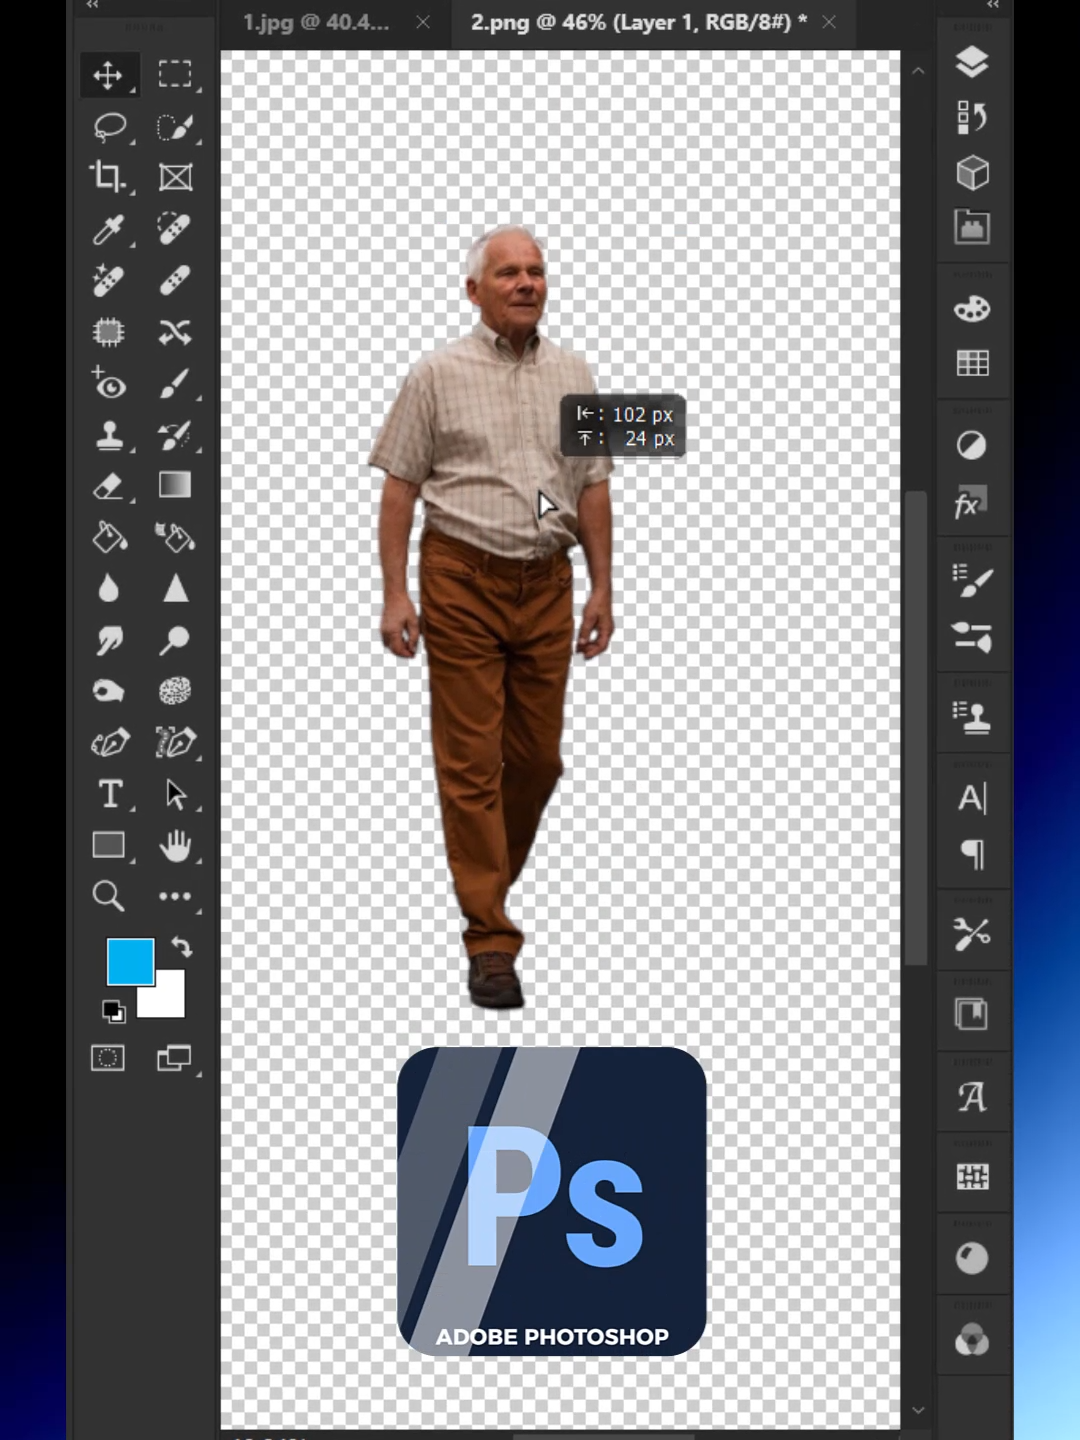 Did U know this Shadow Trick 👀🔥 Follow for more Secrets, Tips and Tricks in Adobe Photoshop